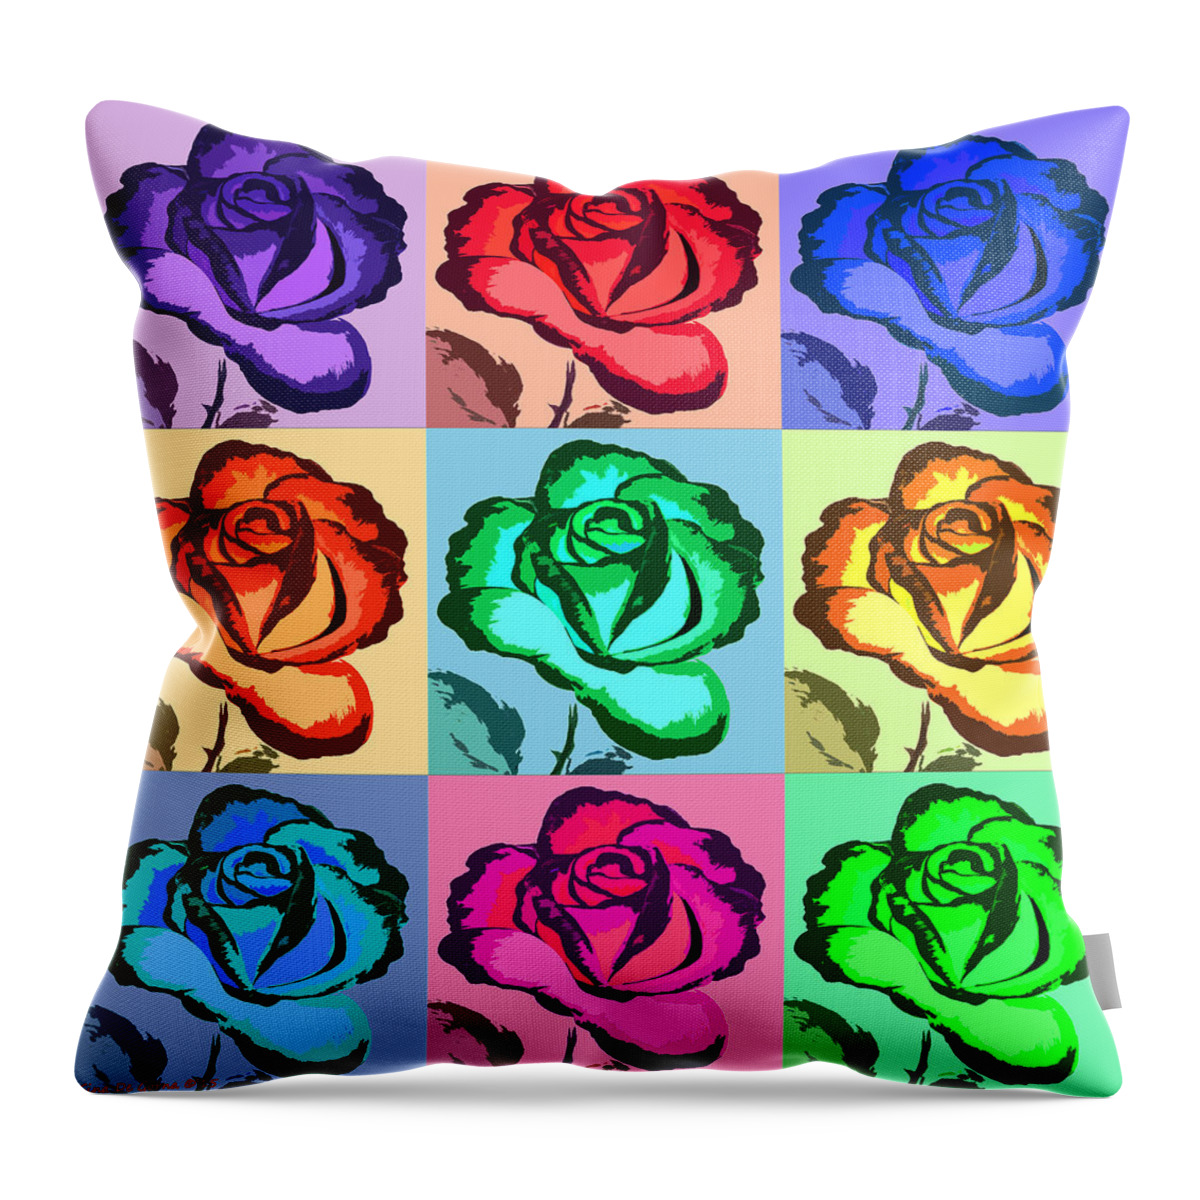 Rose Throw Pillow featuring the painting Pop Art Roses - Square by Gina De Gorna